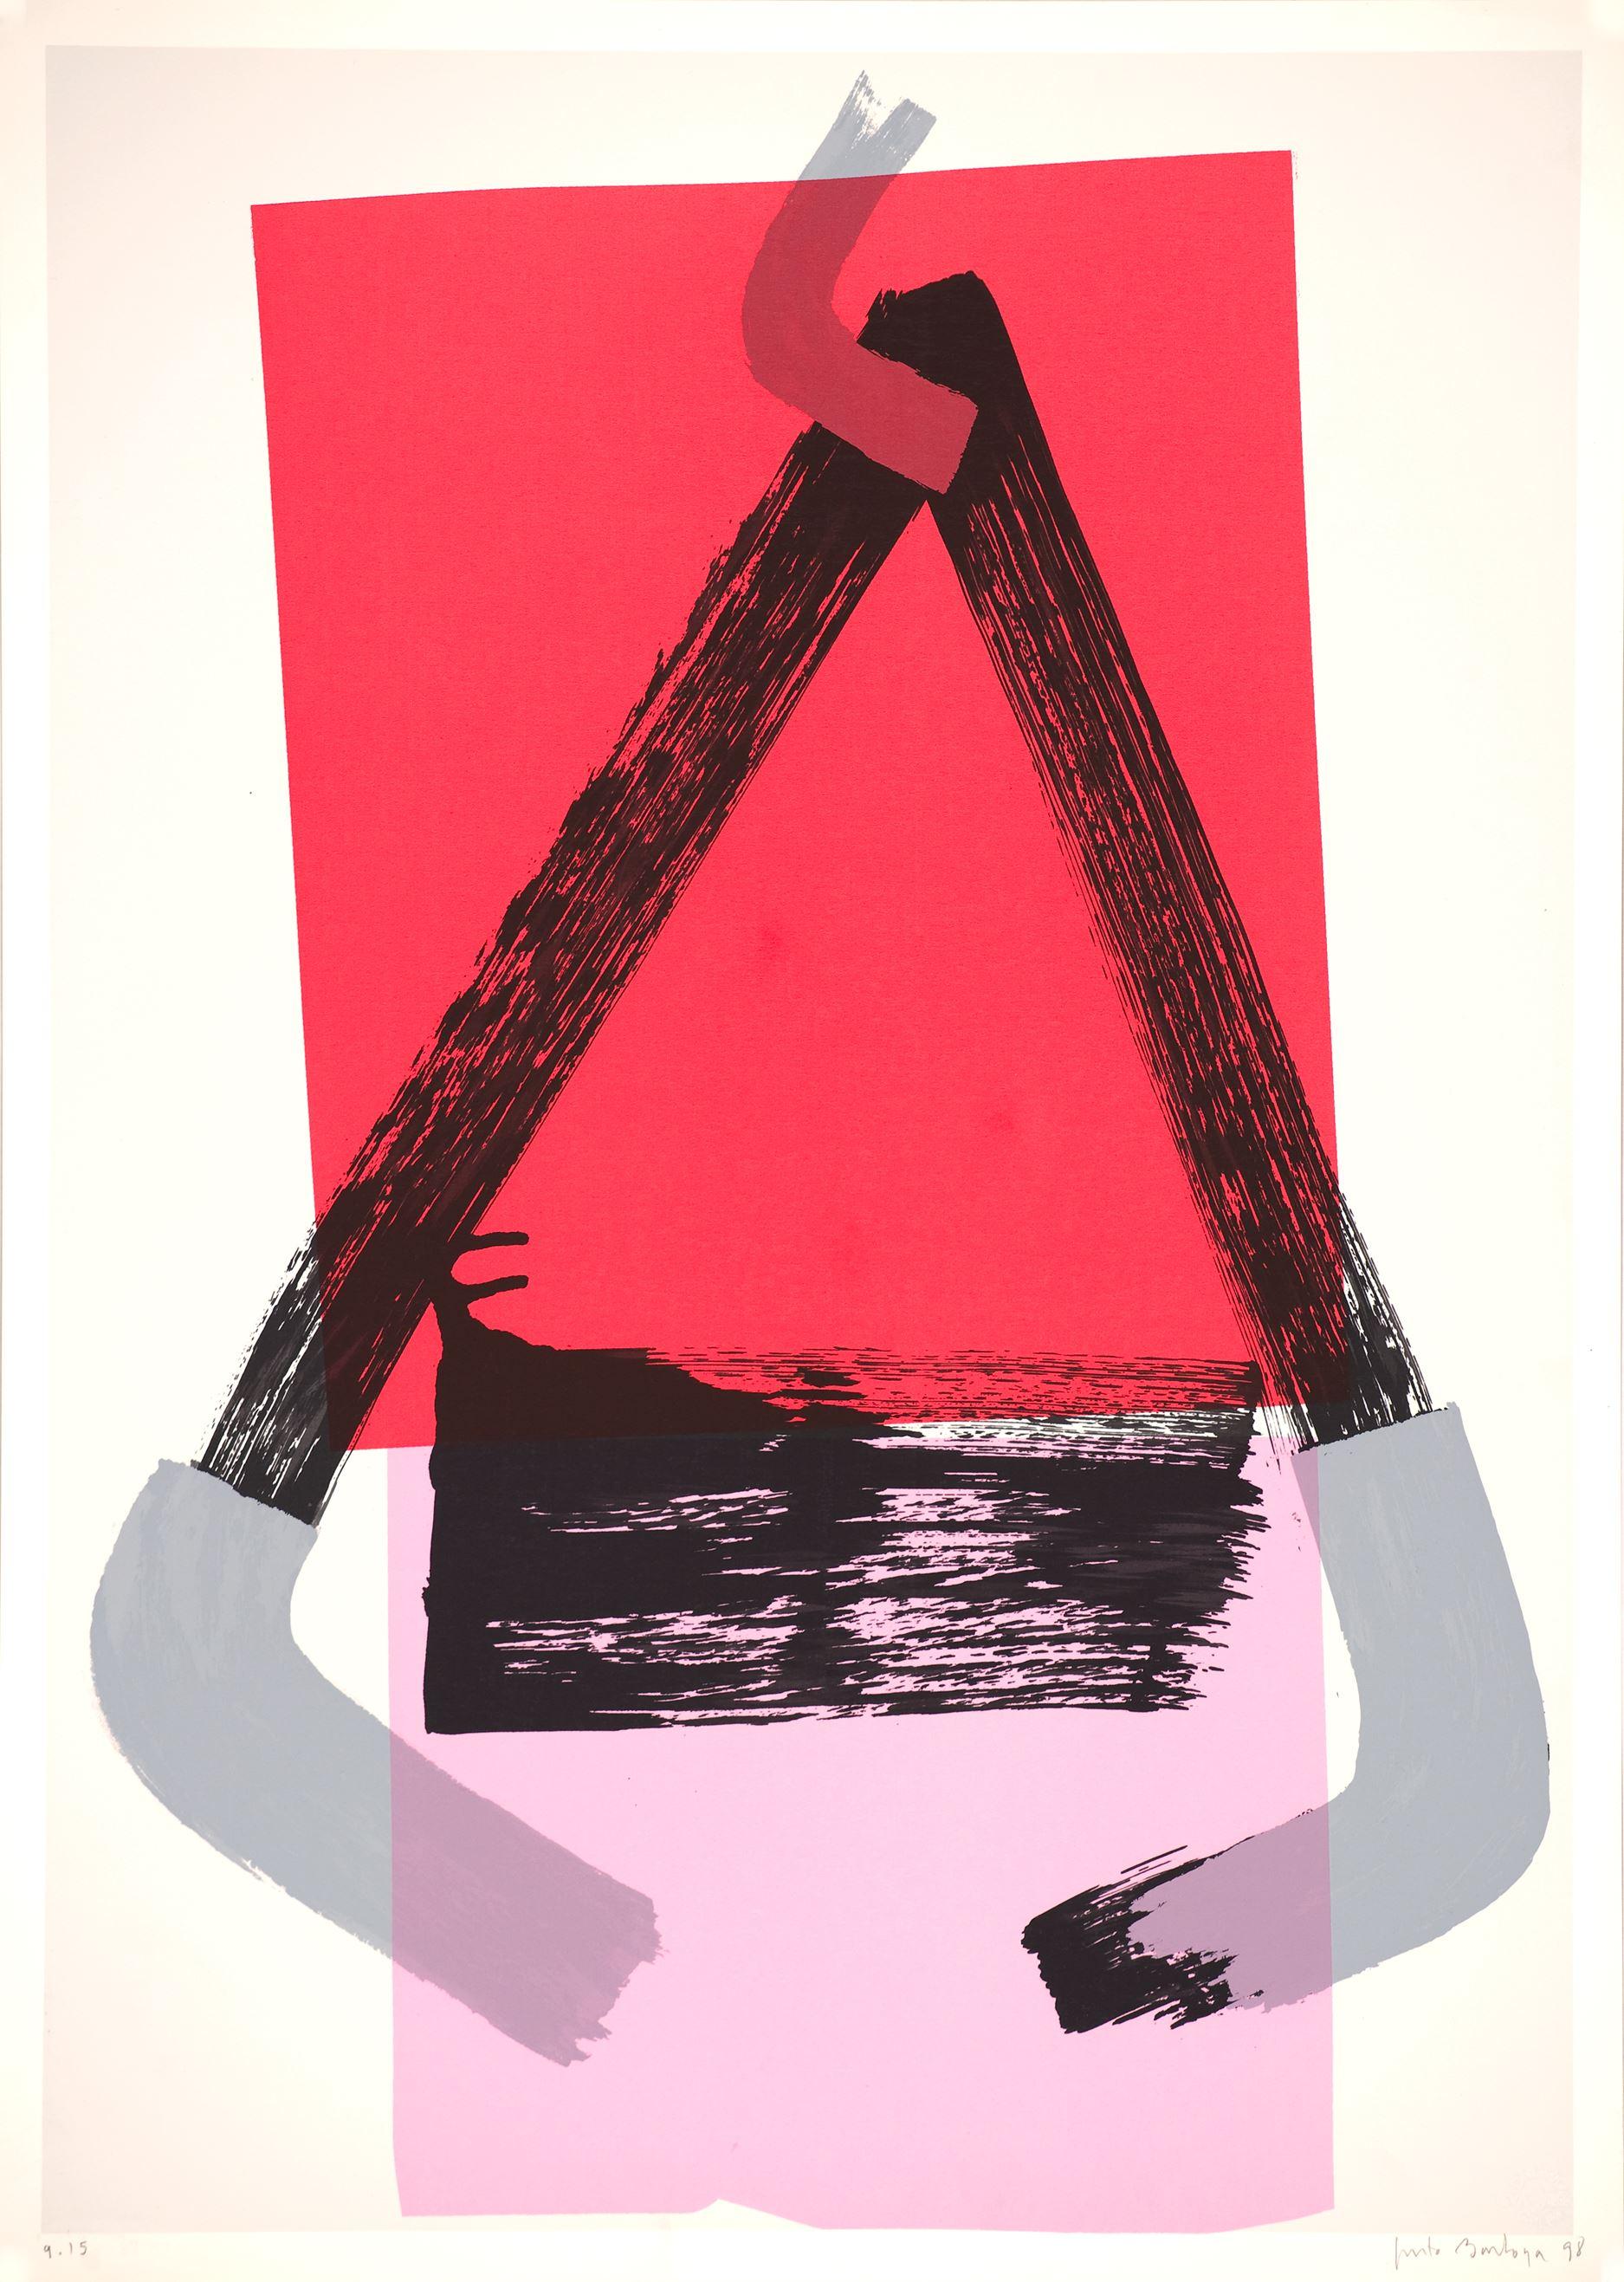 Justo Barboza (Argentina, 1938)
'Sin título (rosa rojo)', 1998
silkscreen on paper Guarro Geler
27.6 x 19.7 in. (70 x 50 cm.)
Edition of 15
Unframed
ID: BAR1437-019-015
Hand-signed by author